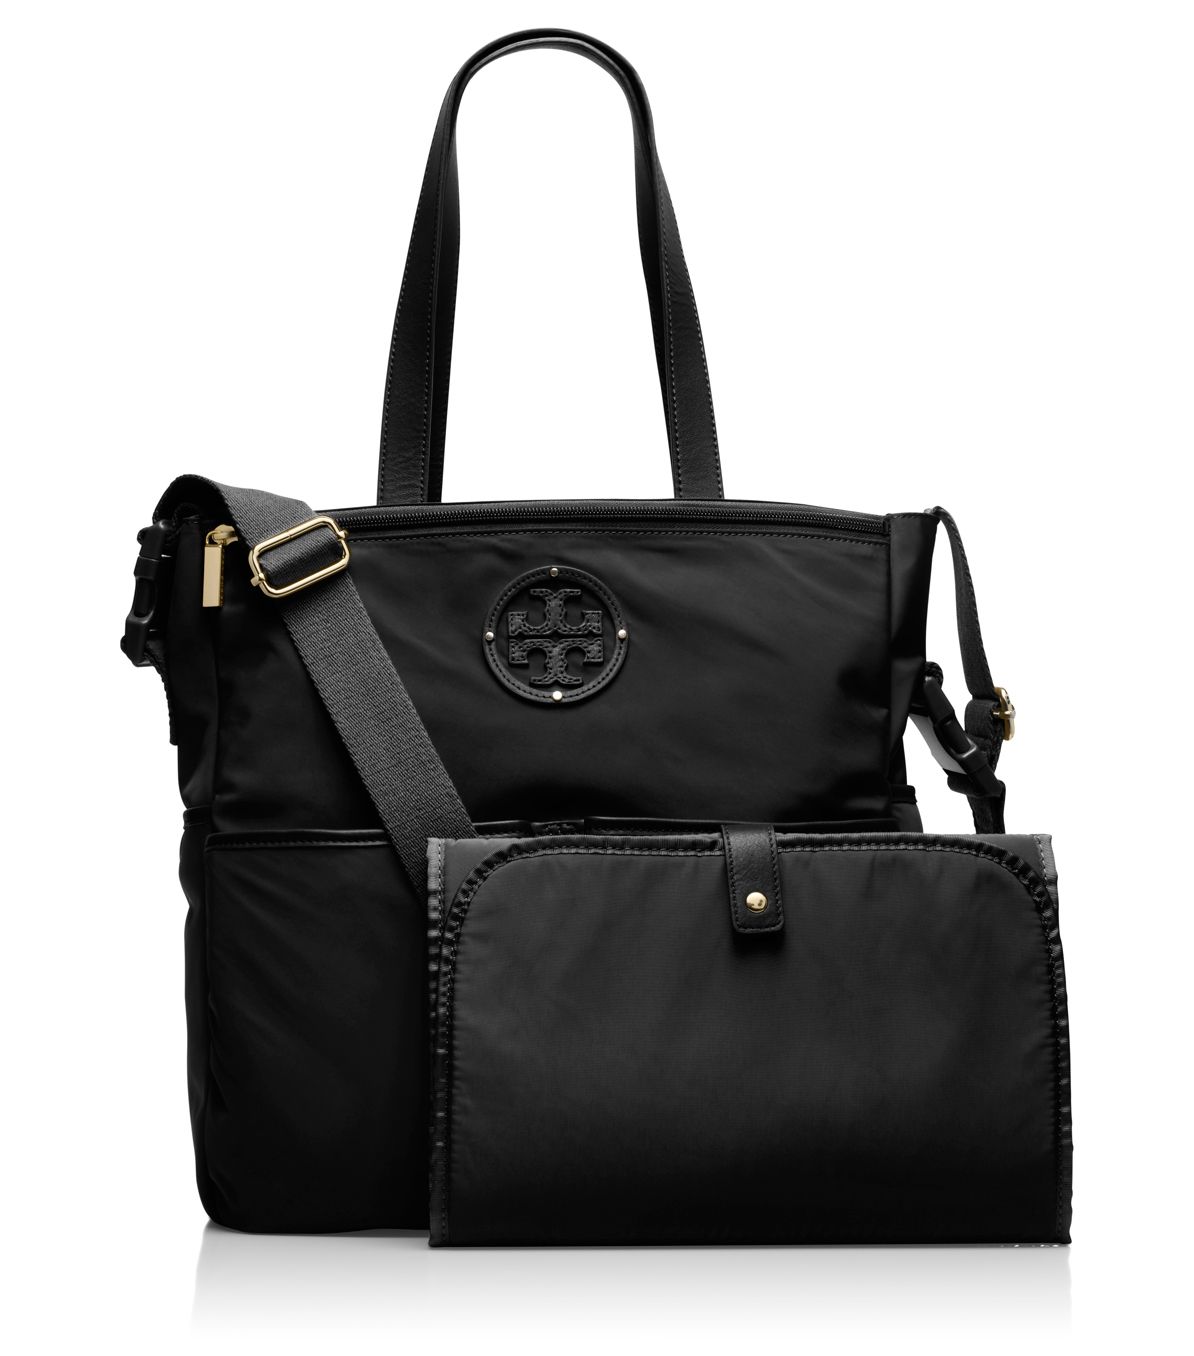 Lyst - Tory Burch Stacked Logo Billy Baby Bag in Black